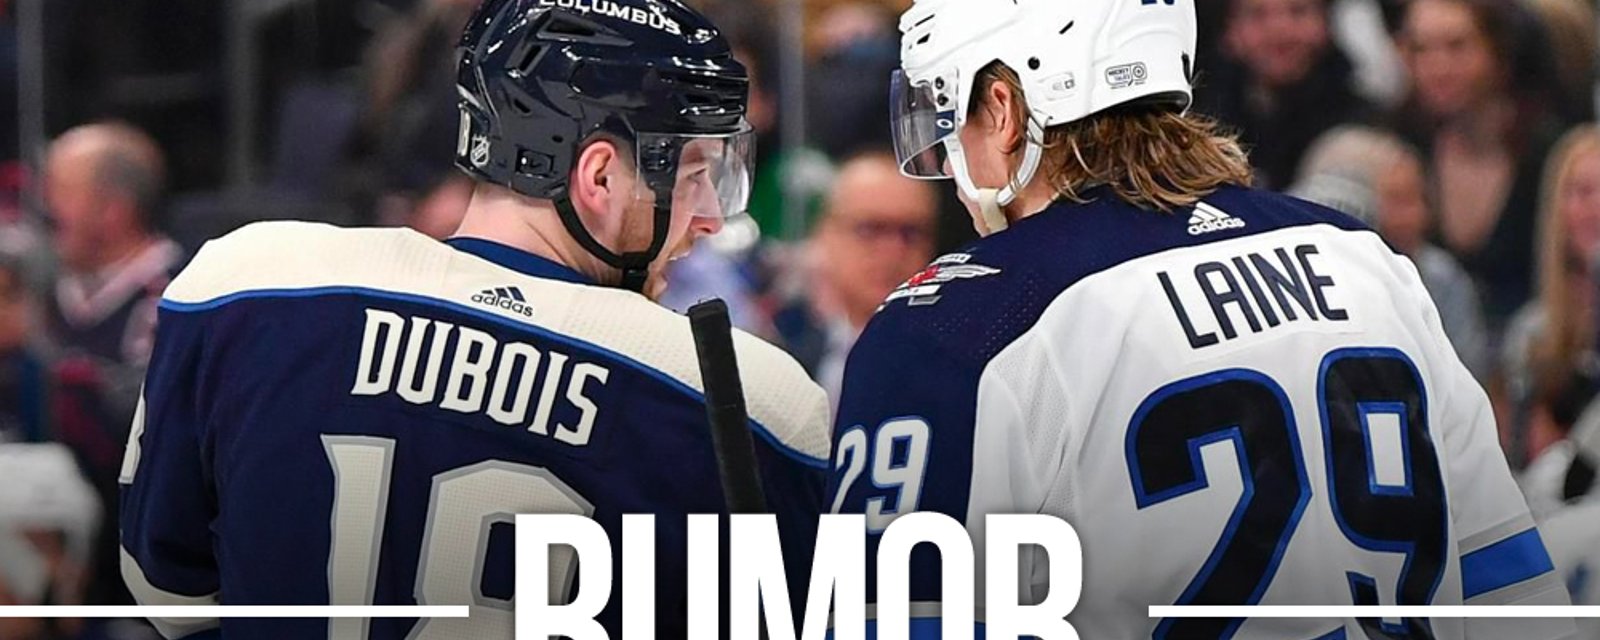 Trade rumors swirl after Laine is pulled from the lineup and Dubois is benched in the 2nd period